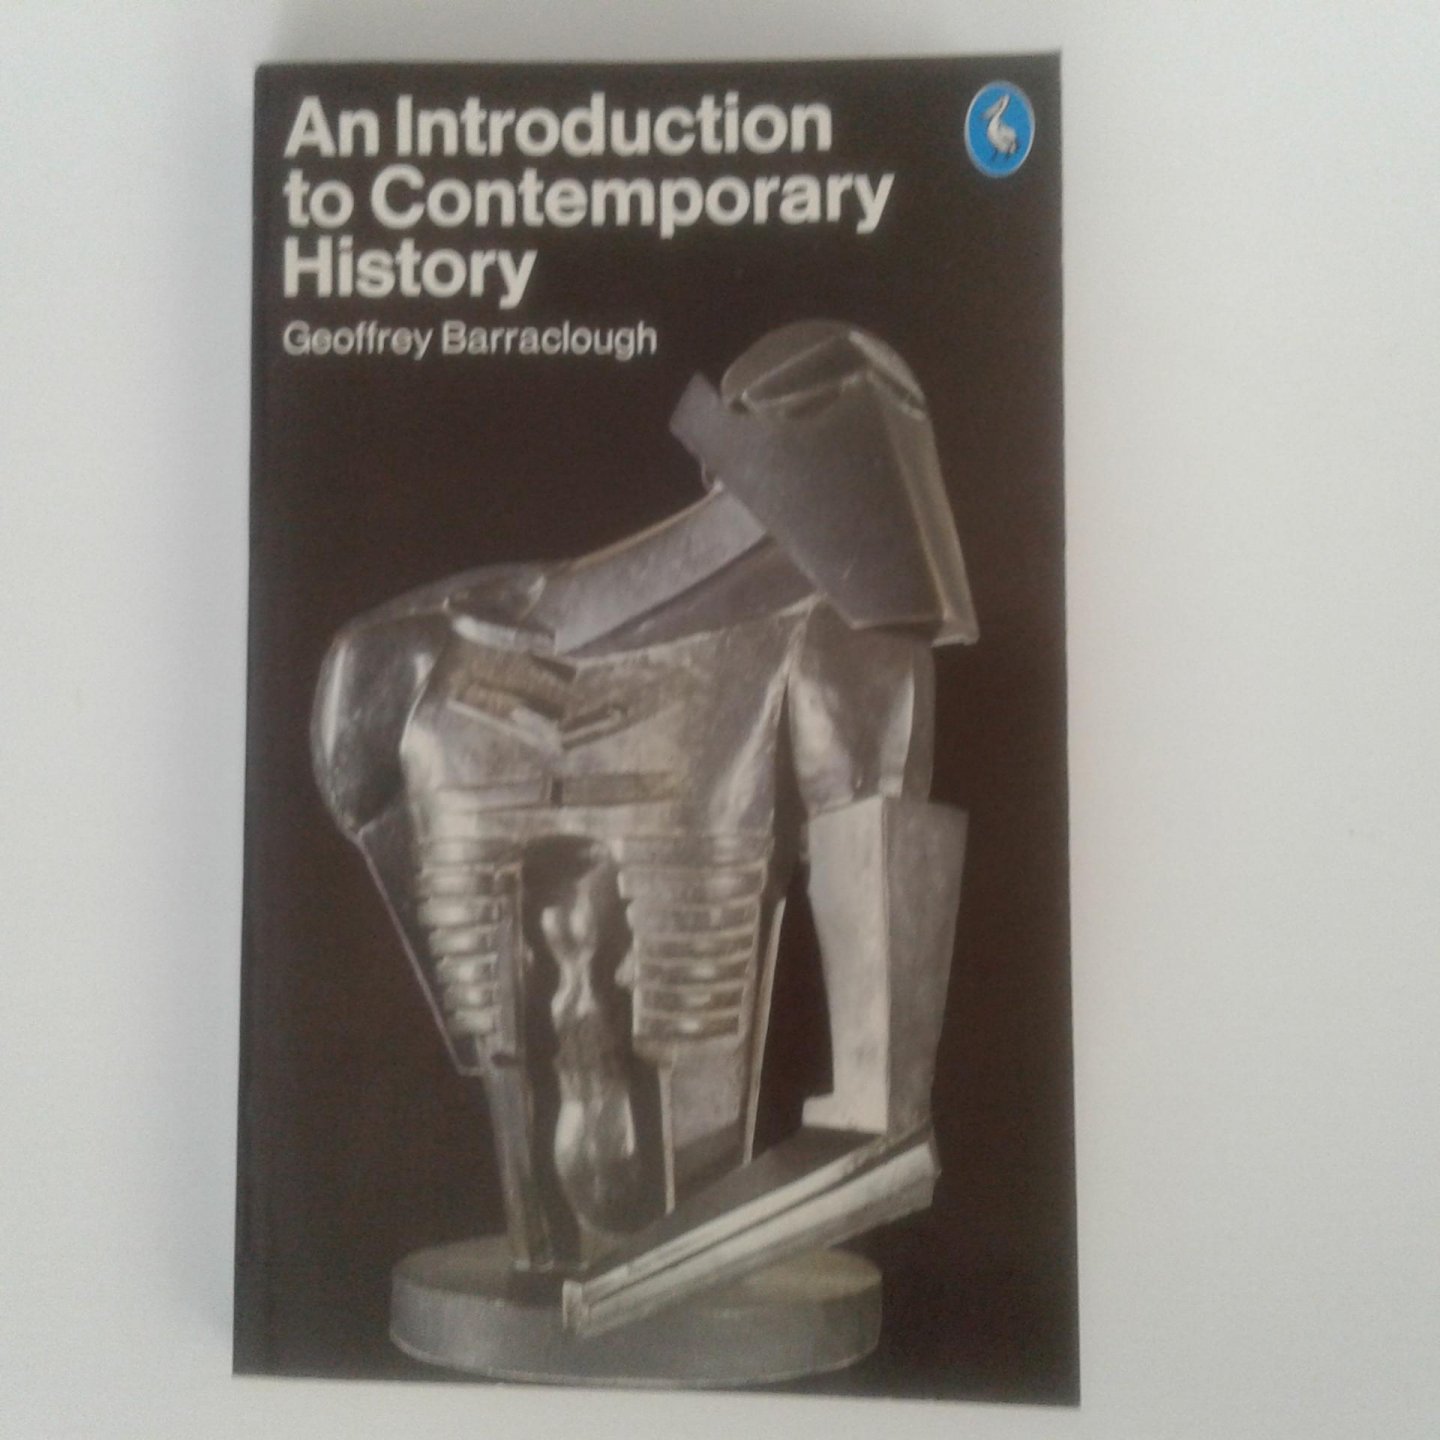 Barraclough, Geoffrey - An Introduction to Contemporary History